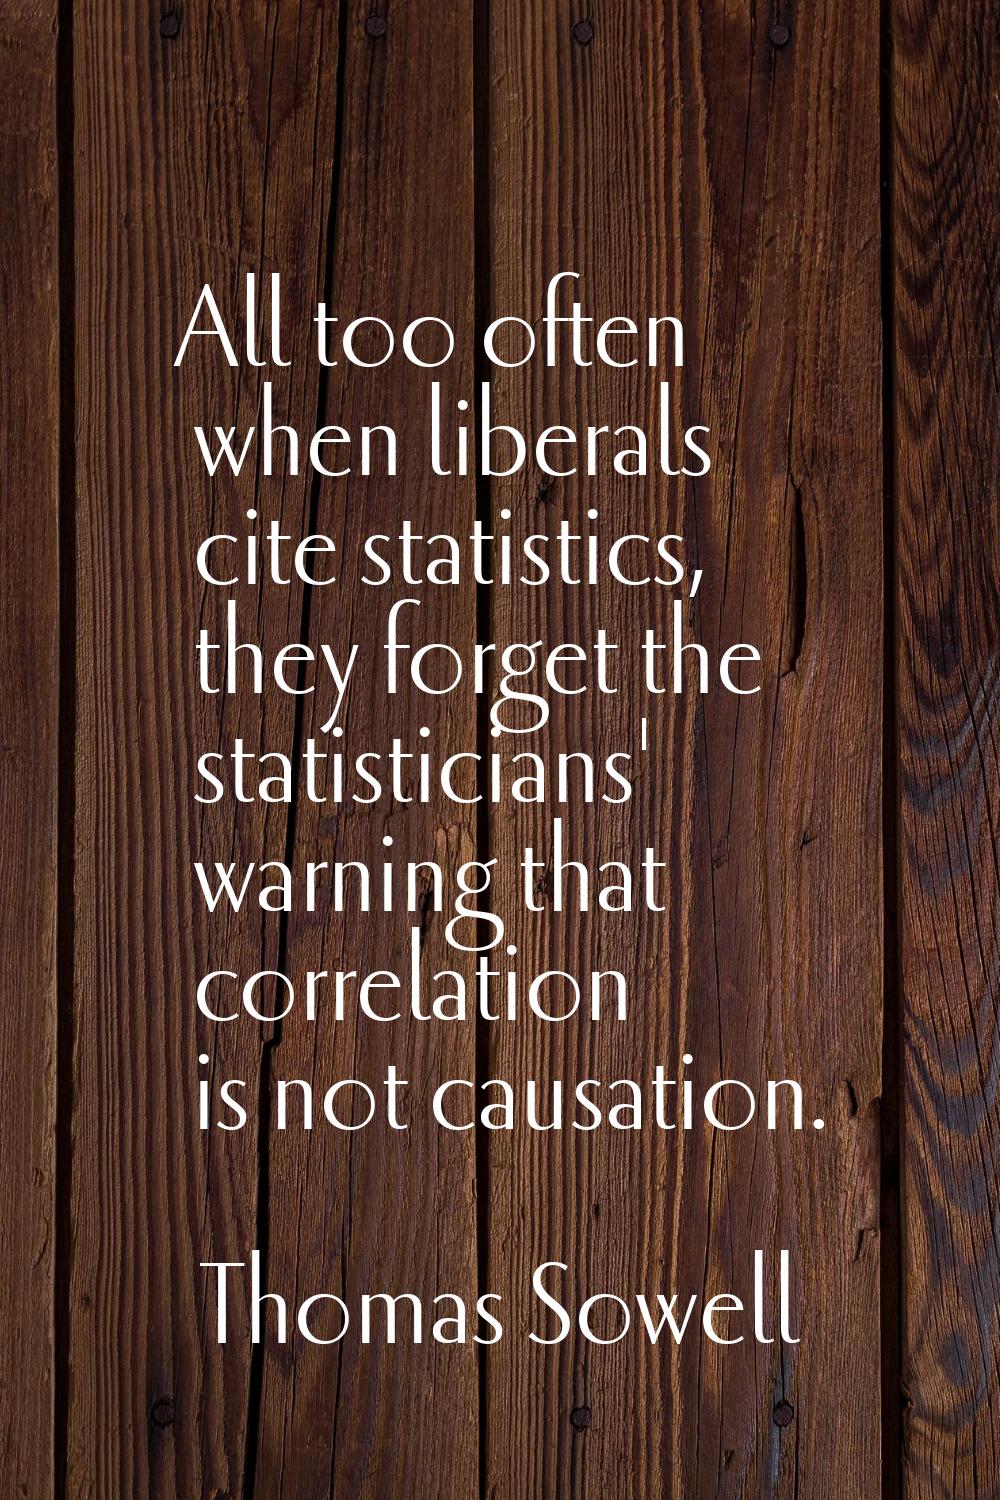 All too often when liberals cite statistics, they forget the statisticians' warning that correlatio